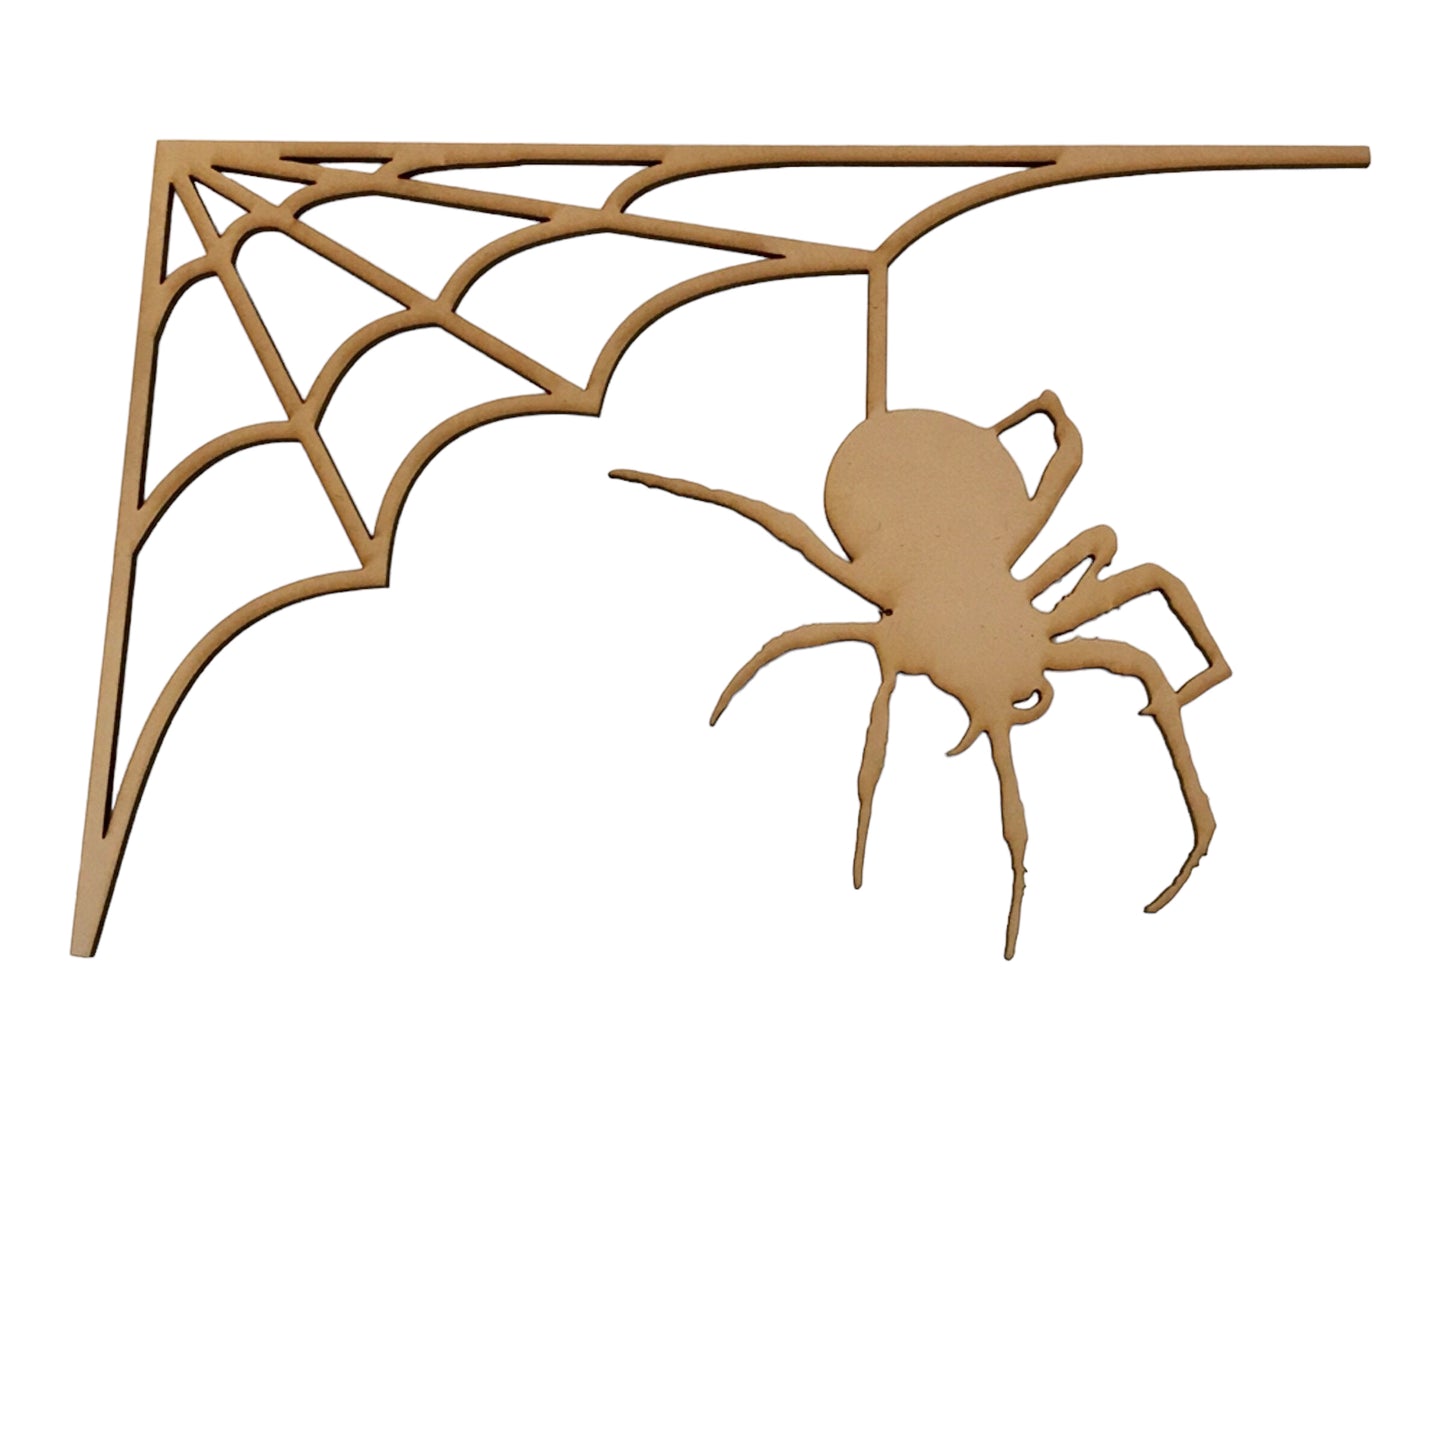 Spider Spiders Web MDF Shape DIY Raw Cut Out Art Craft Decor - The Renmy Store Homewares & Gifts 